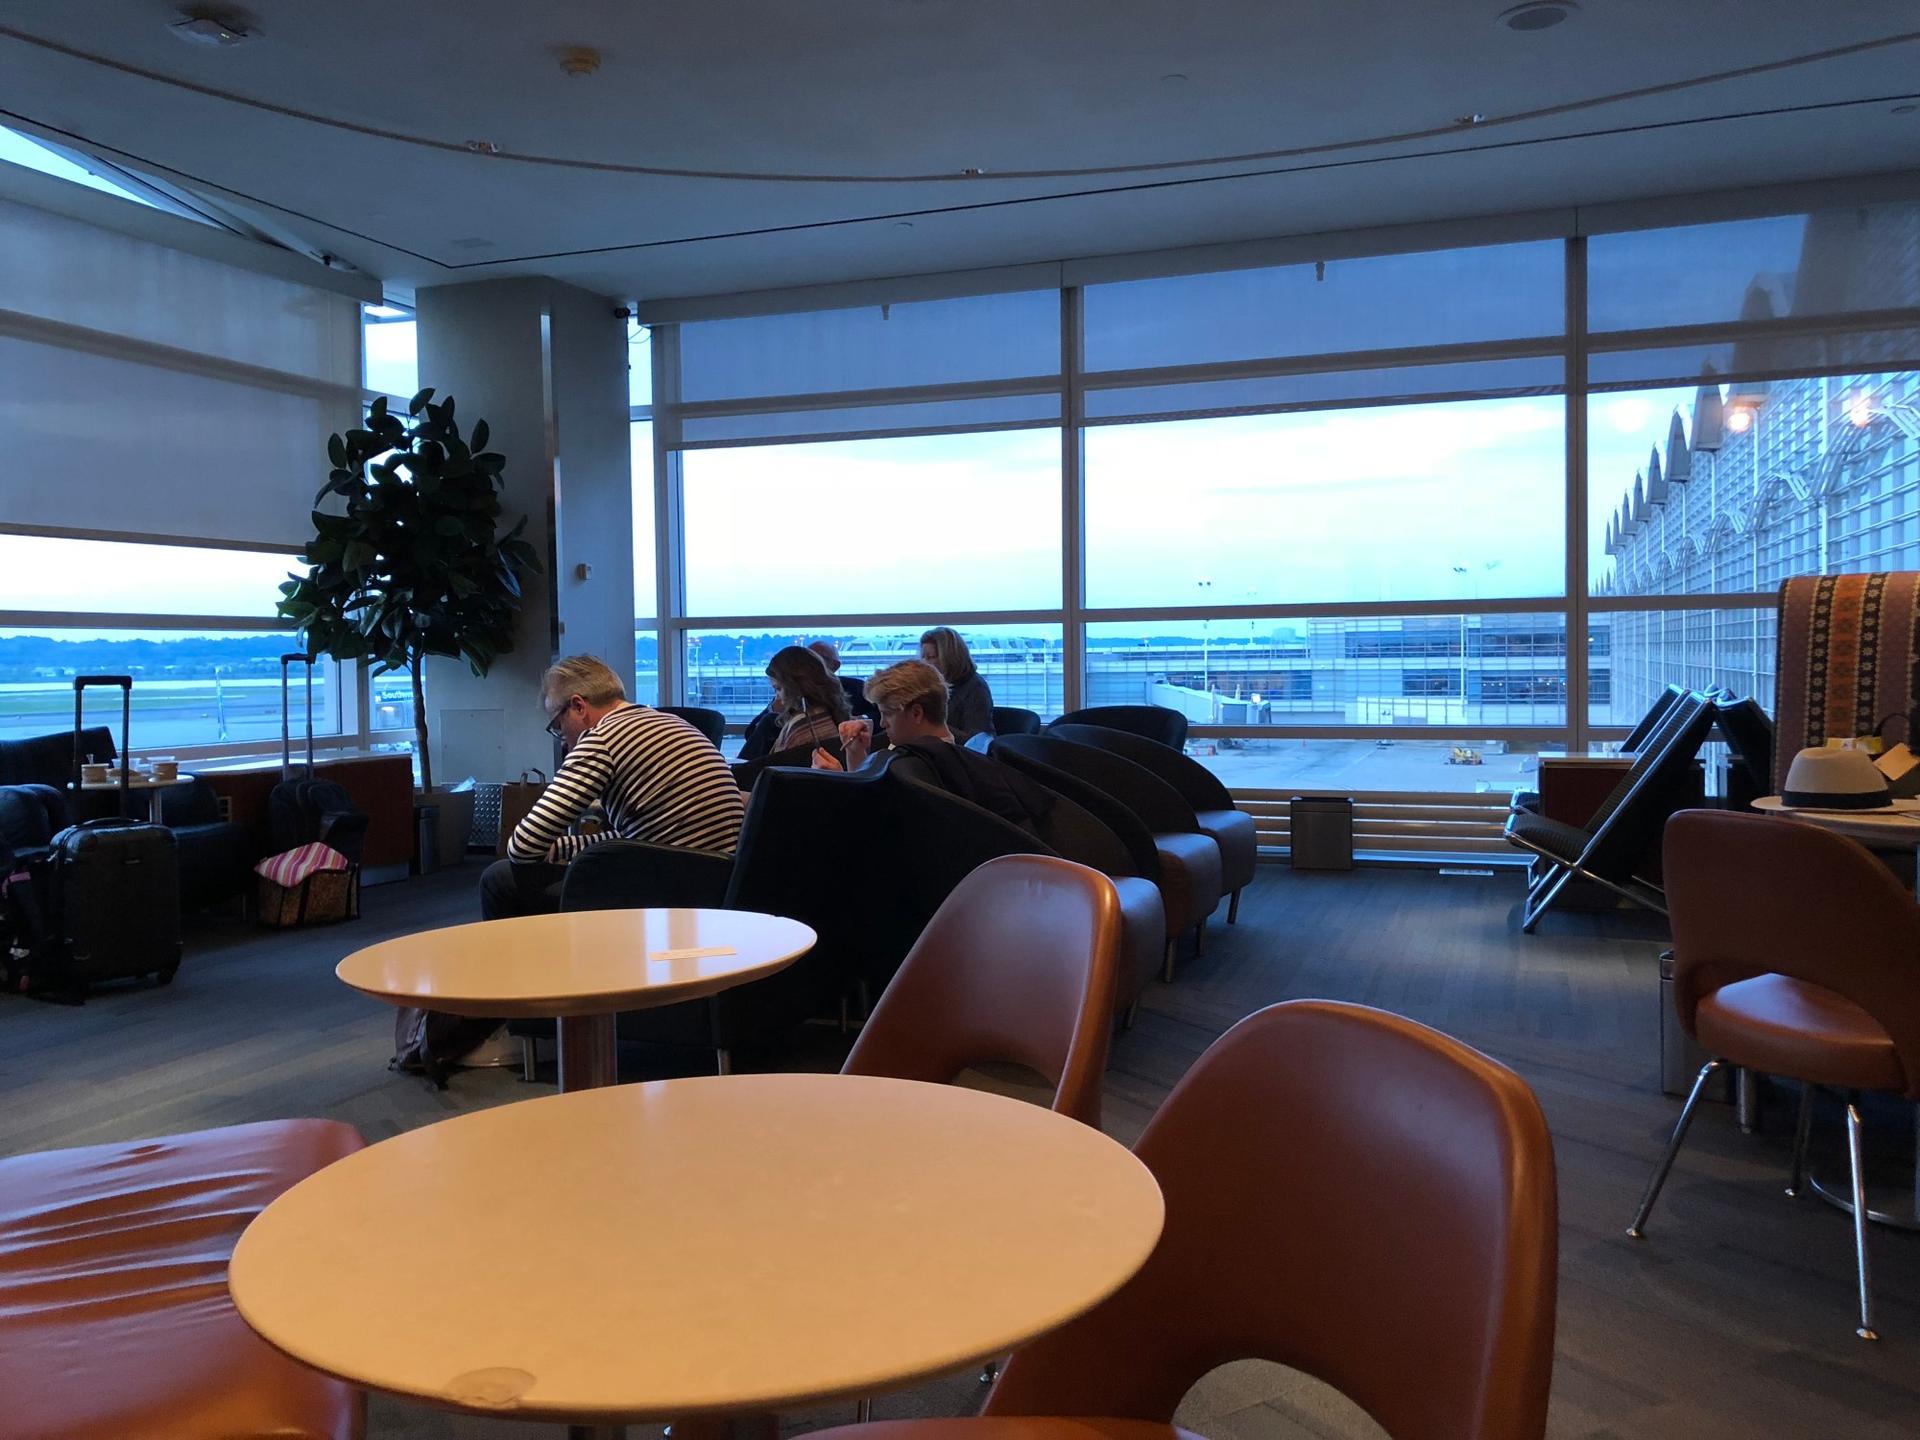 American Airlines Admirals Club image 22 of 22